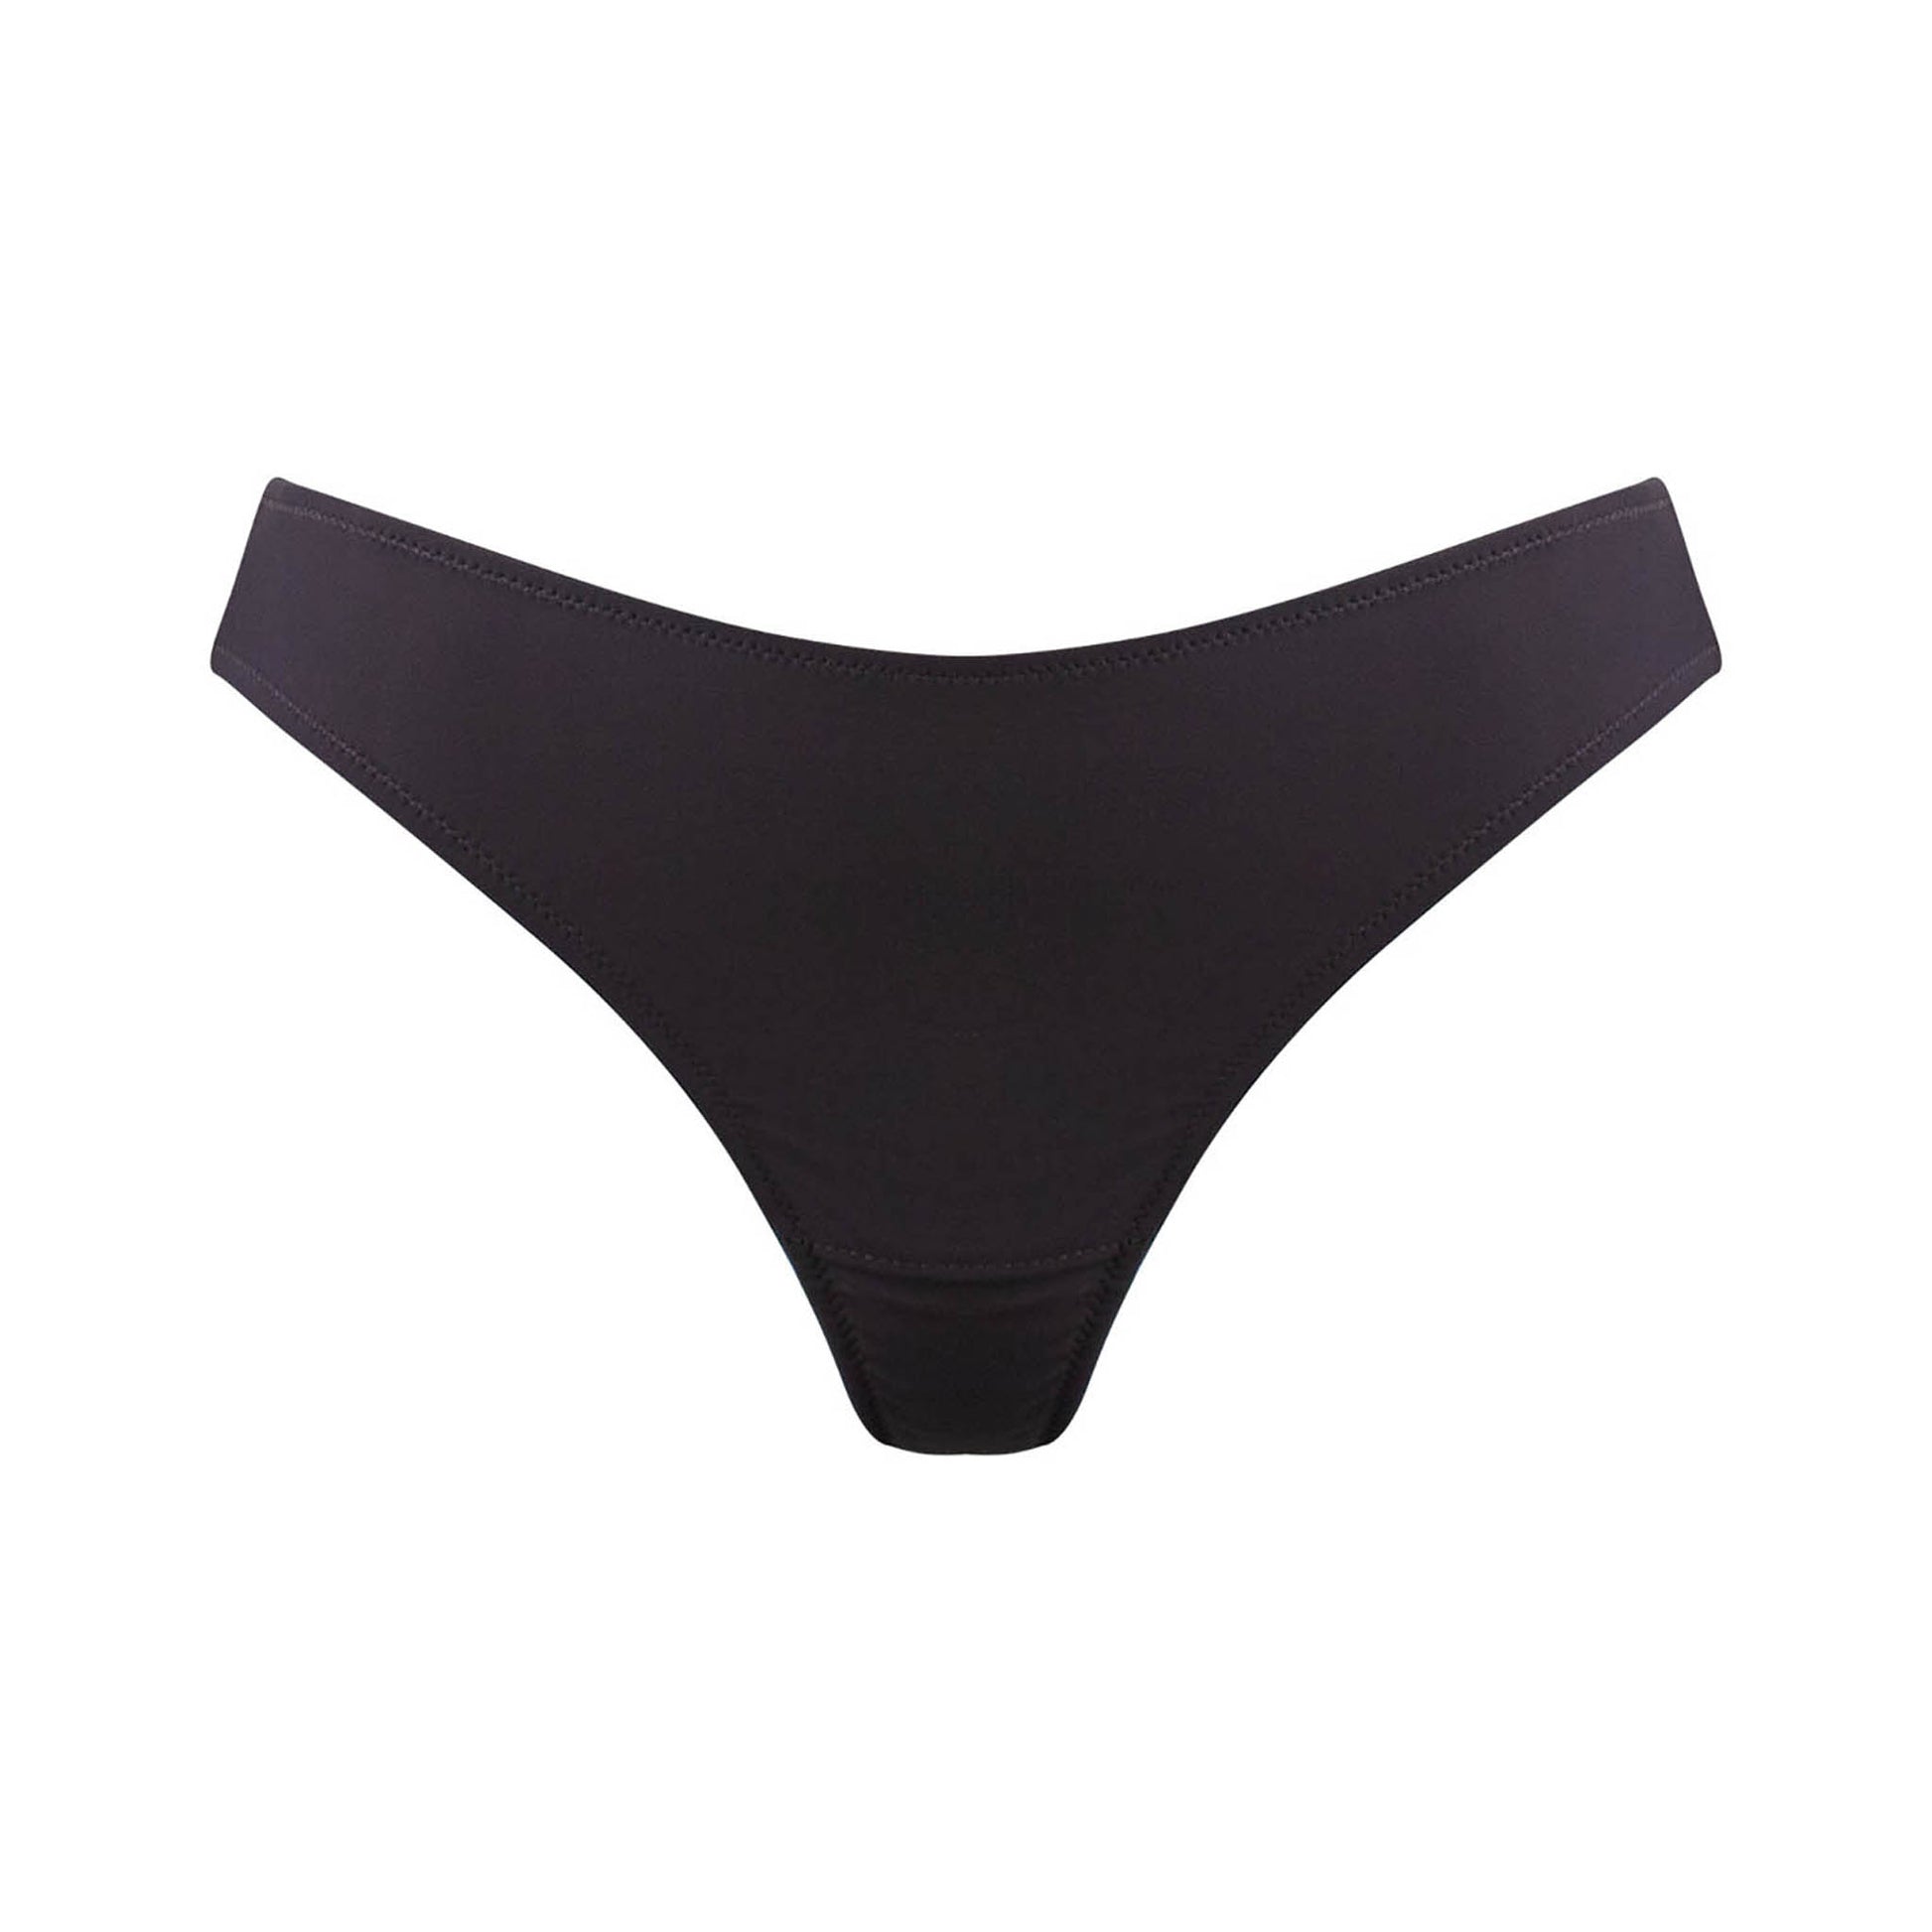 Nokaya ULTRA black thong. Smooth finish from out front and back.